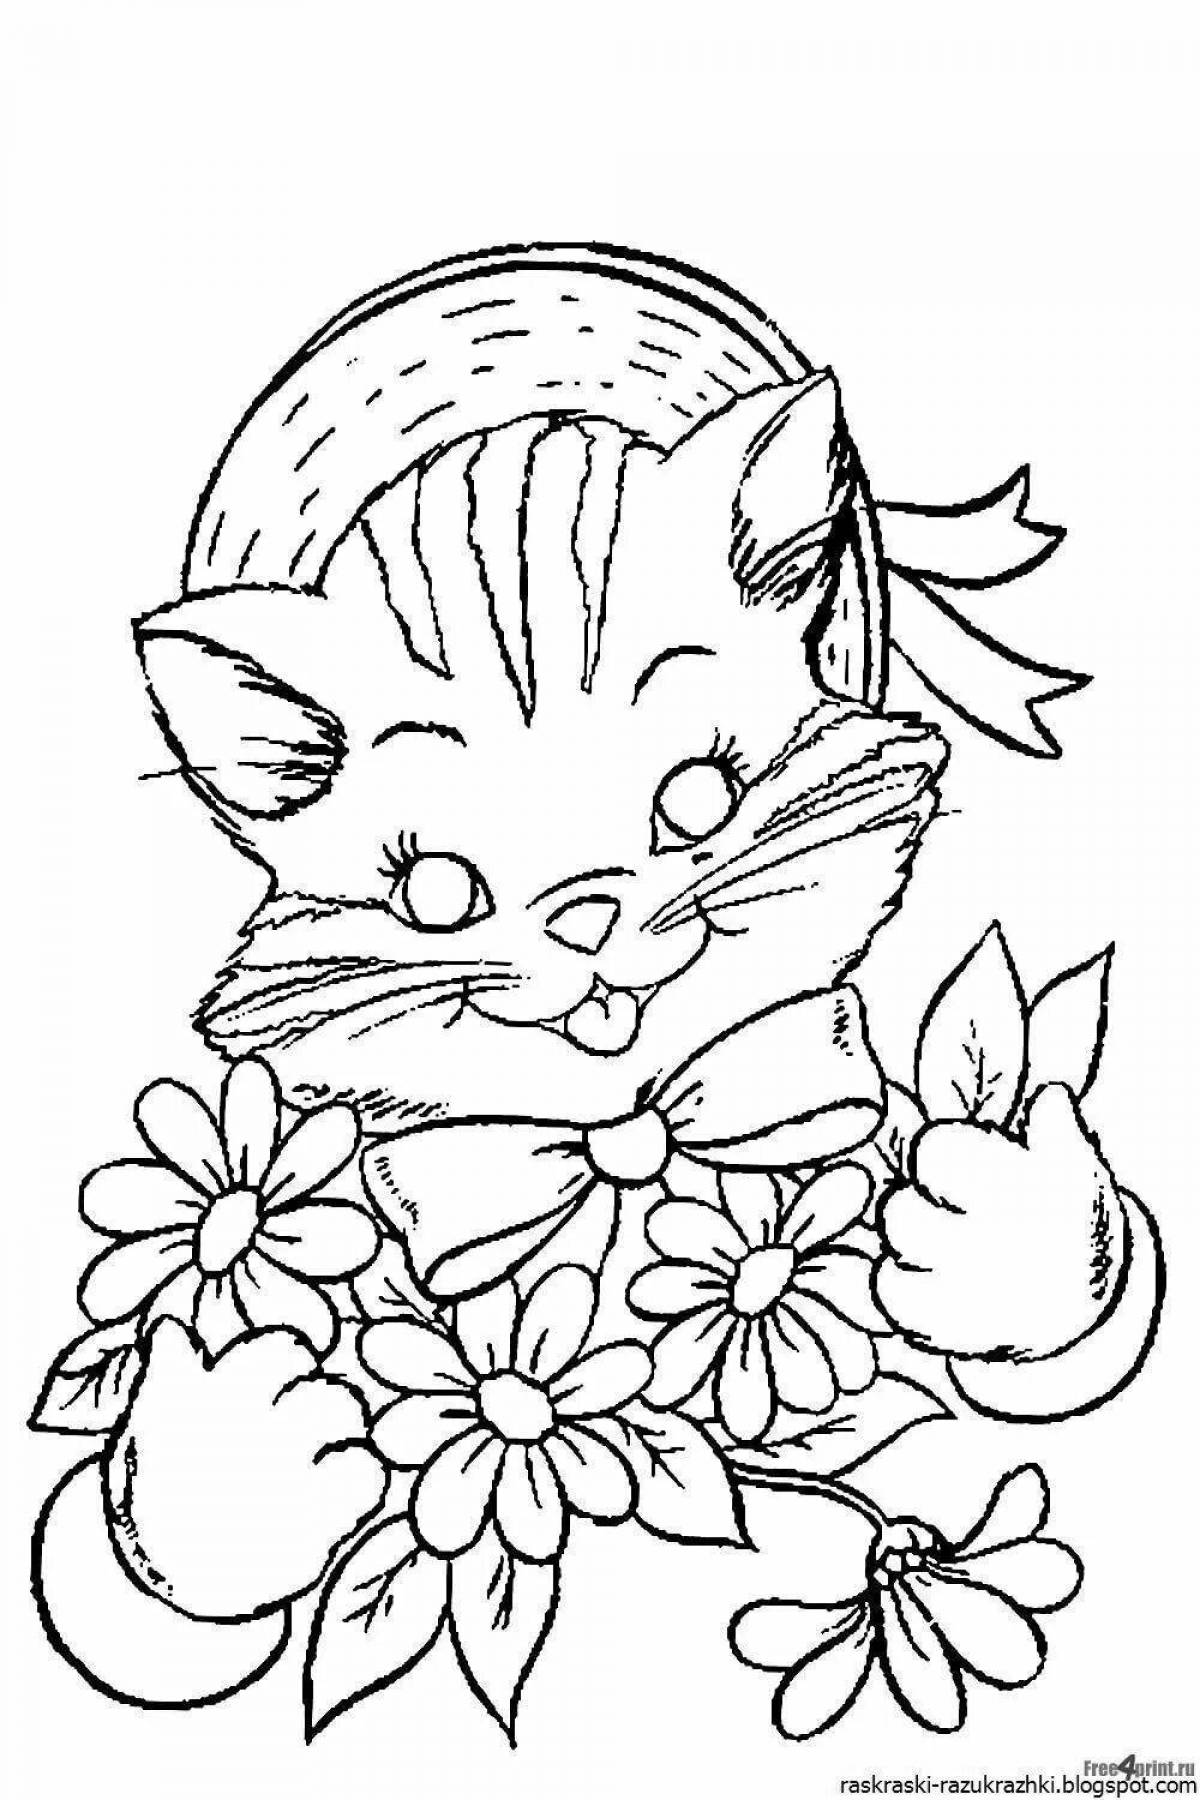 Awesome cat coloring page